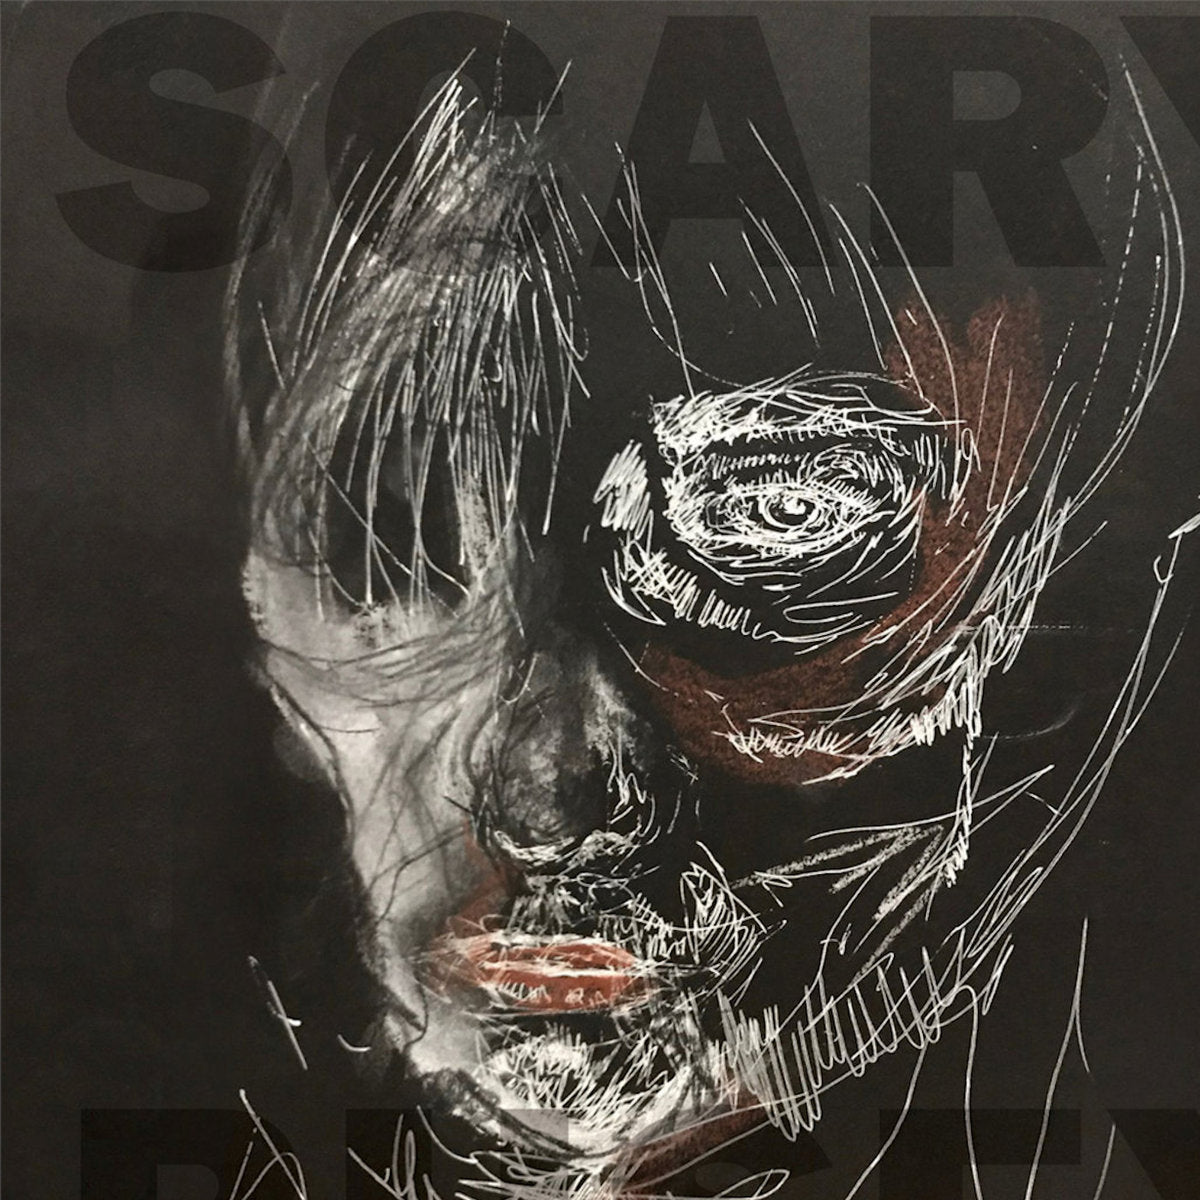 Scary Busey -s/t" Compact Disc